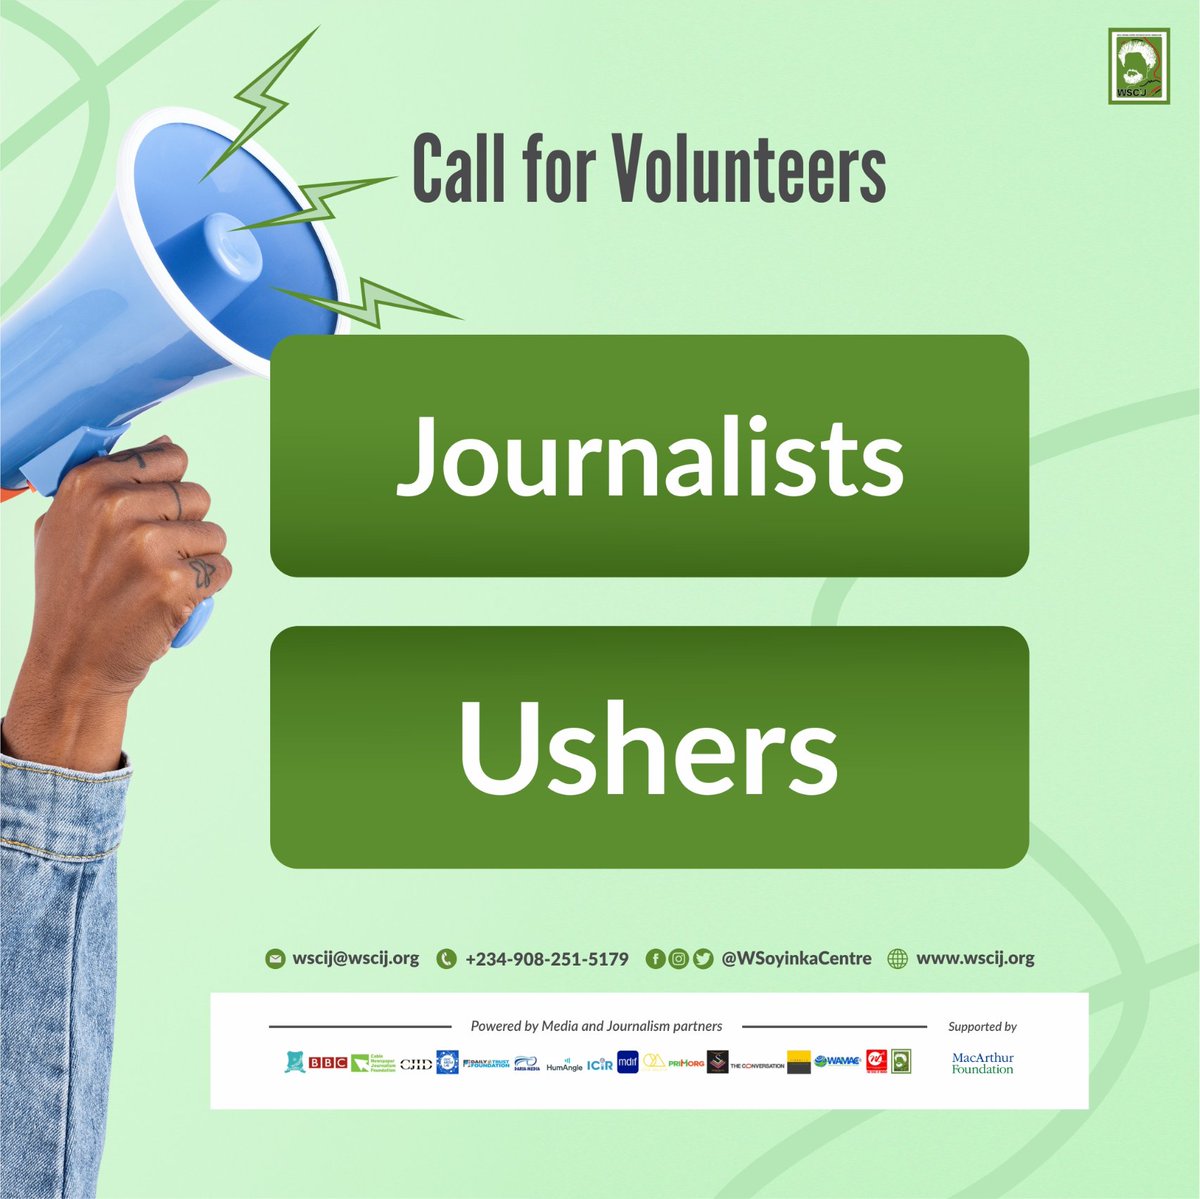 Selected journalists will assist with drafting press releases, on-the-spot interviews and curating social media content during the two-day event in Abuja. Ushers will guide and assist attendees, and keep an eye on crowd behaviour, thereby contributing to an organised experience.